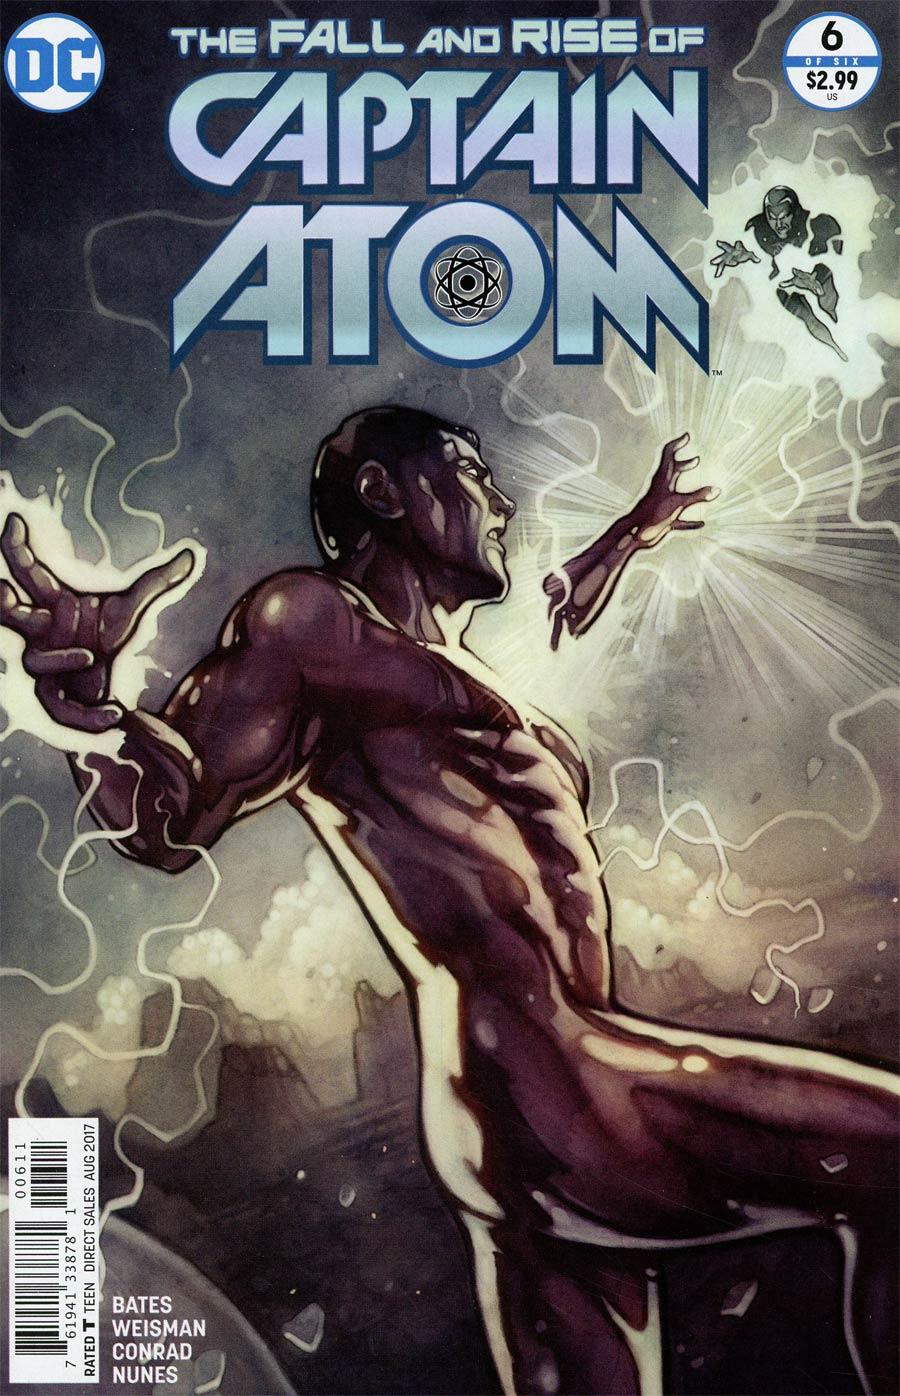 Fall And Rise Of Captain Atom Vol. 1 #6